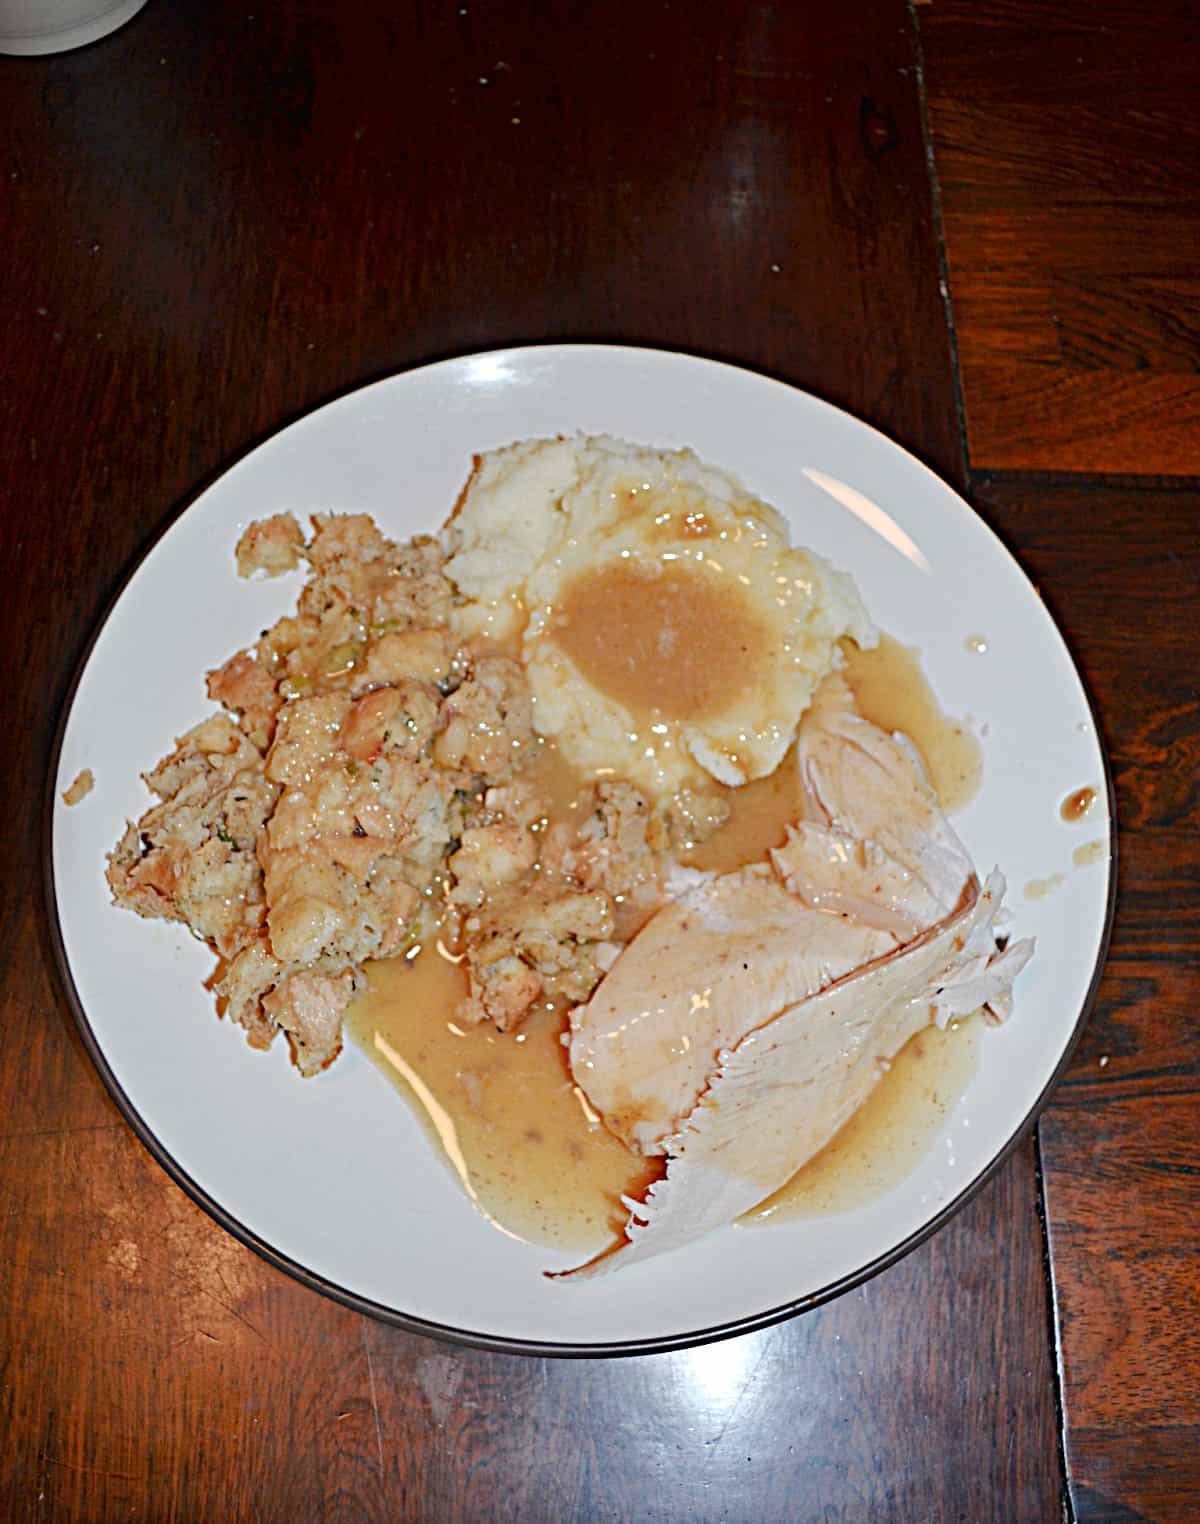 A plate with turkey, mashed potatoes, stuffing, and gravy on it.